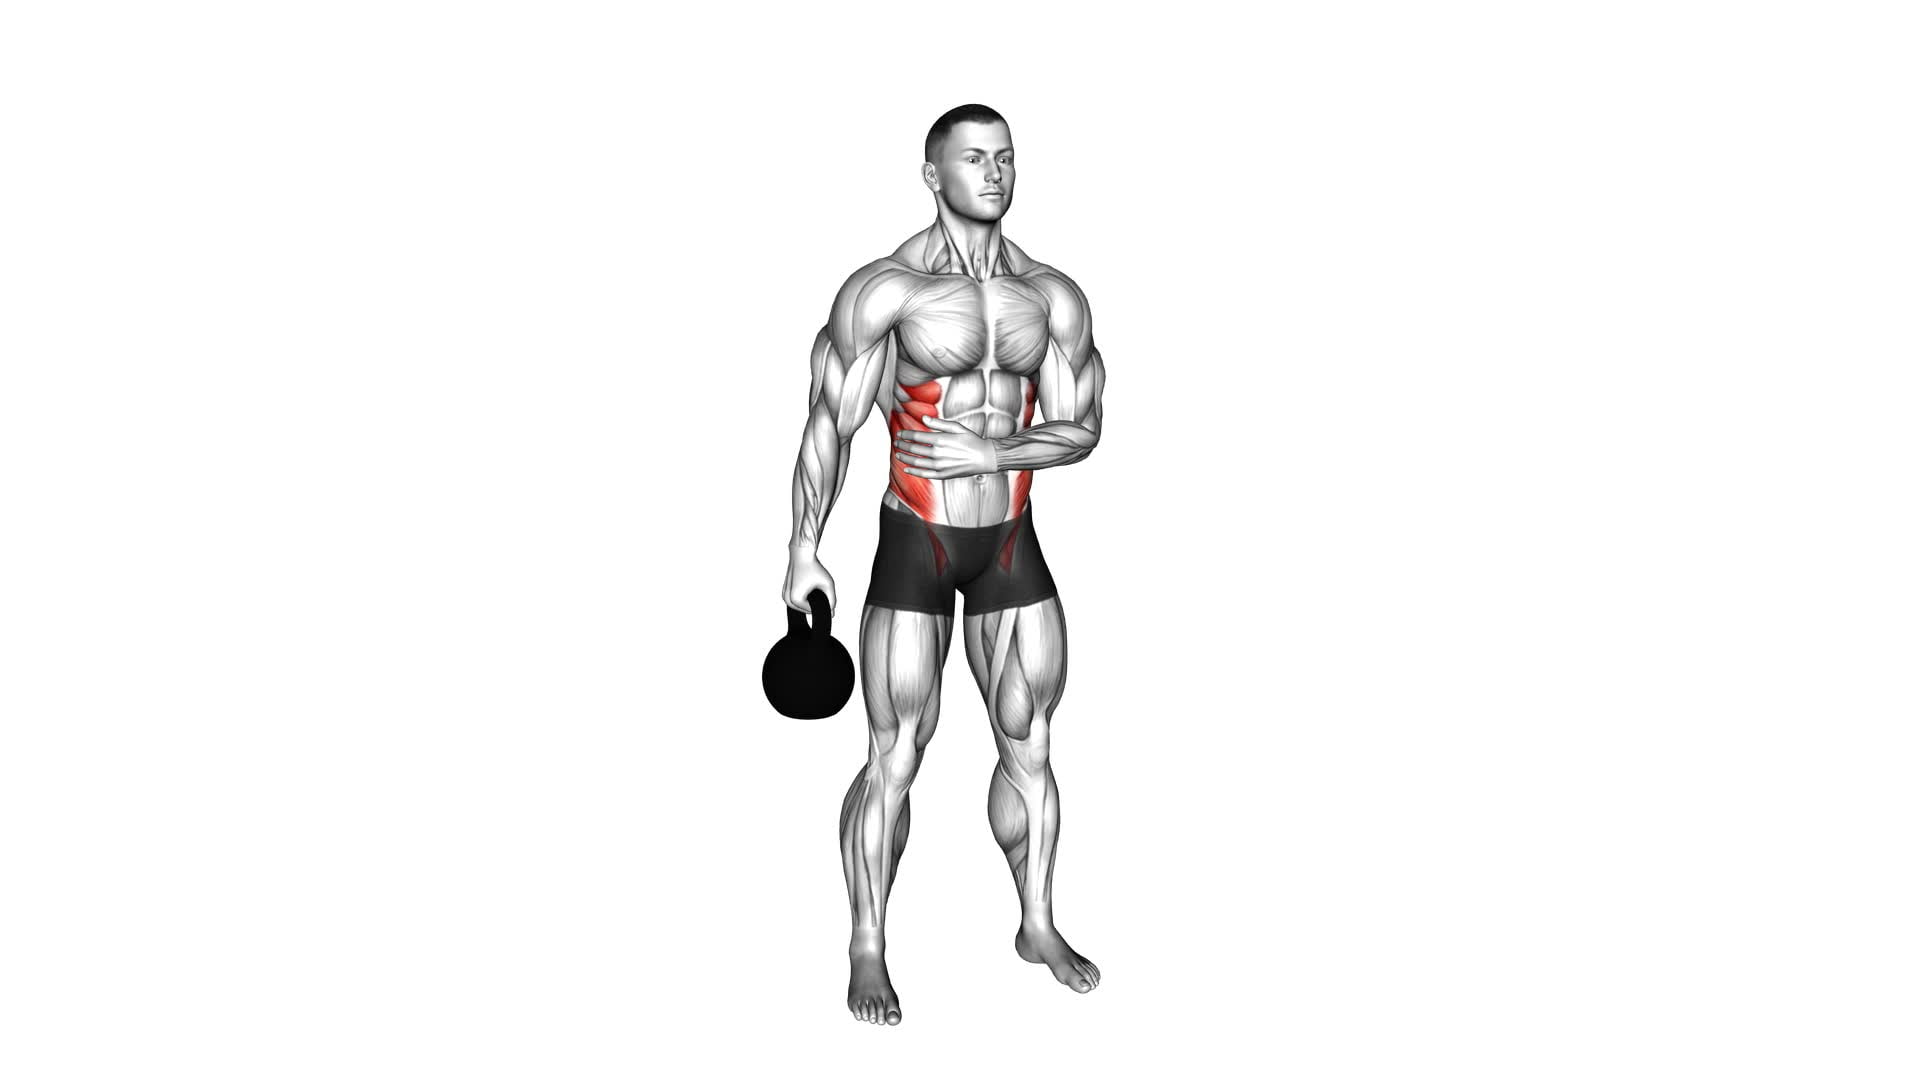 Kettlebell Suitcase Hold (male) - Video Exercise Guide & Tips